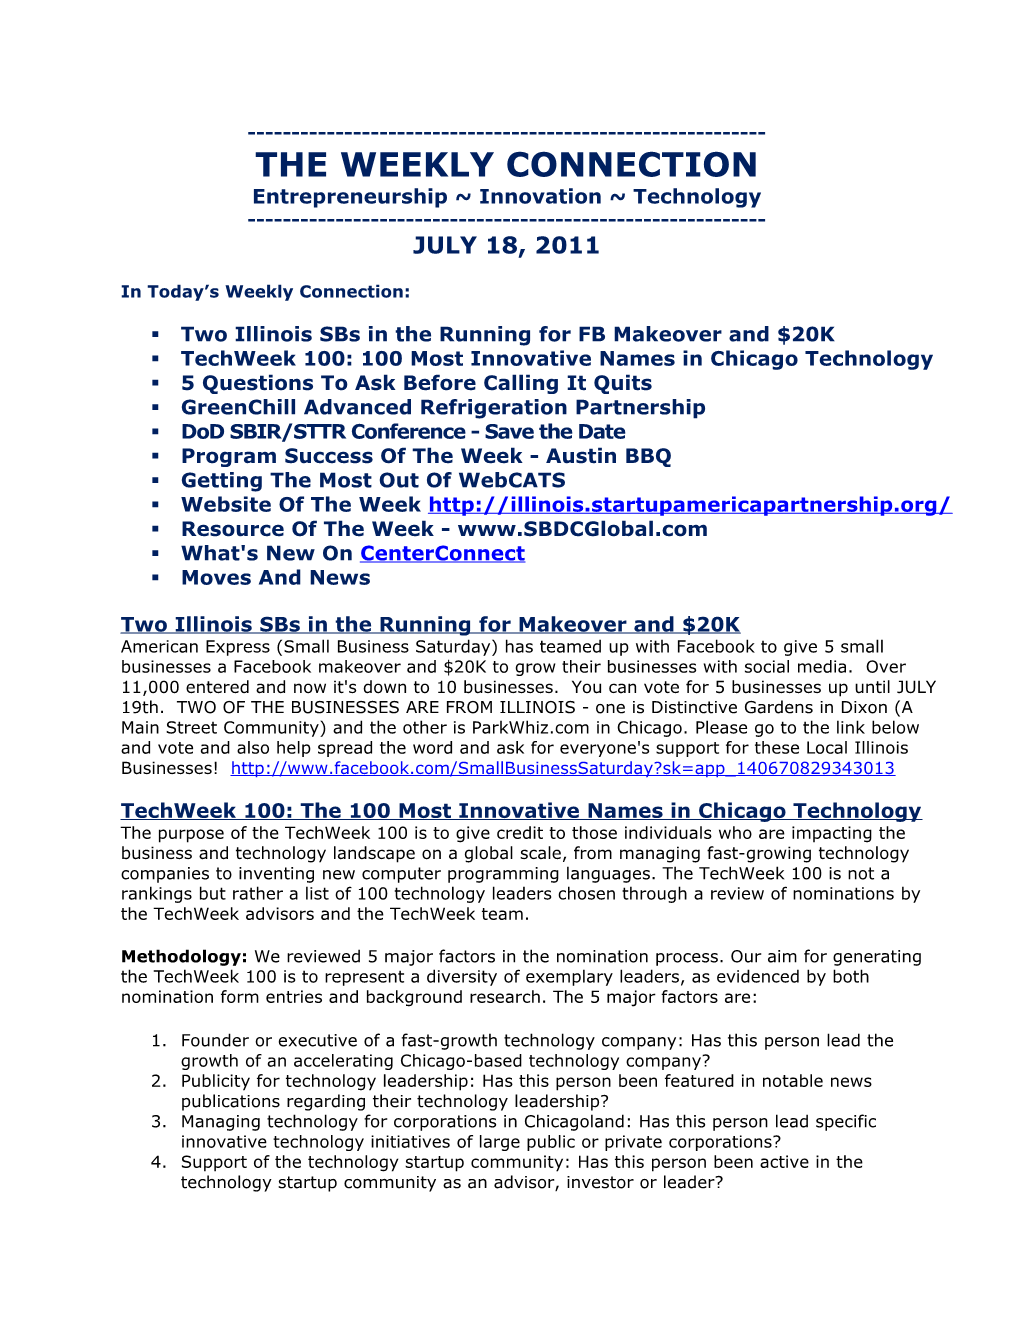 The Weekly Connection